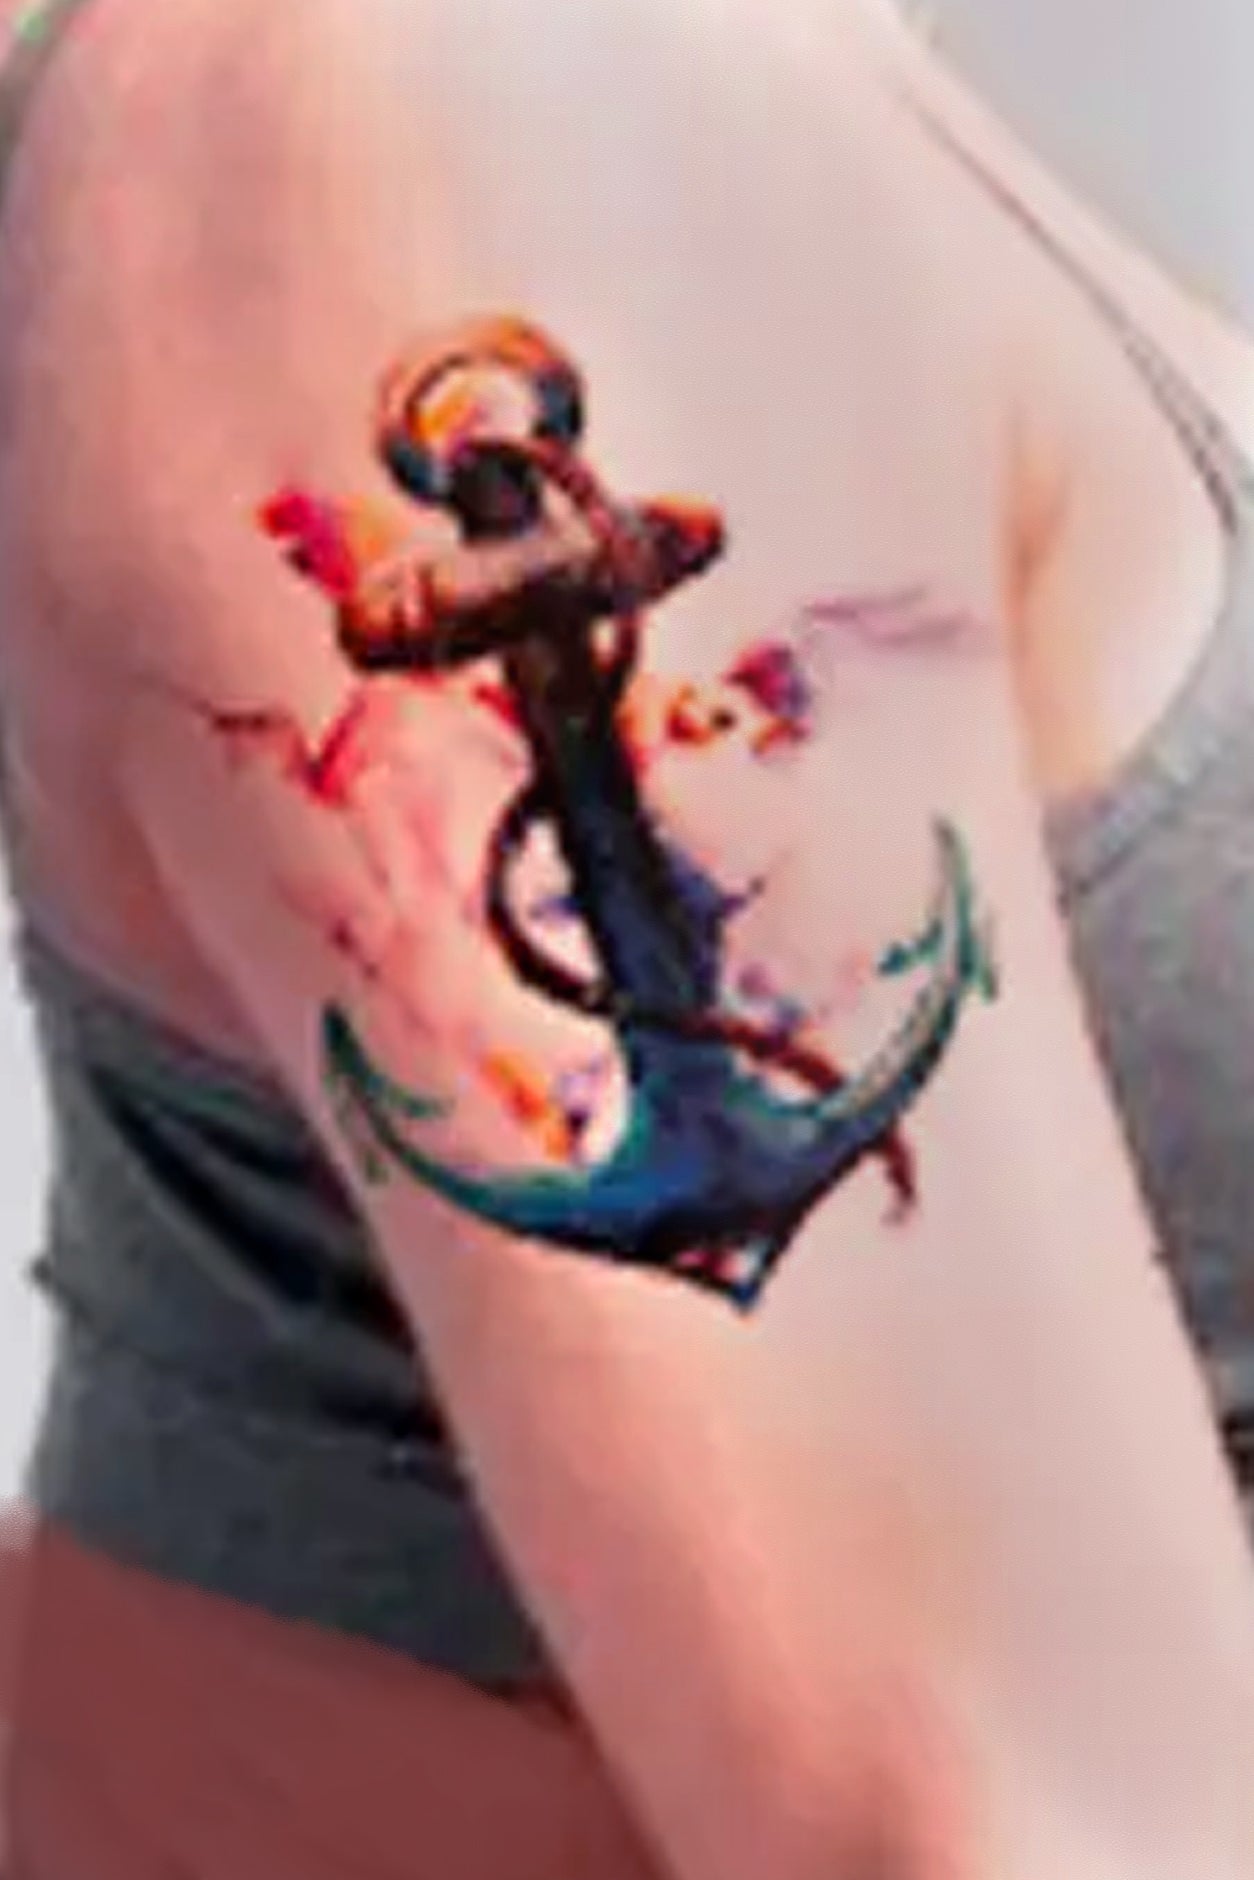 A woman wears the attractive anchor with hummingbirds  on her arm. The hummingbirds are soft and colorful, moving, next to the solid anchor.